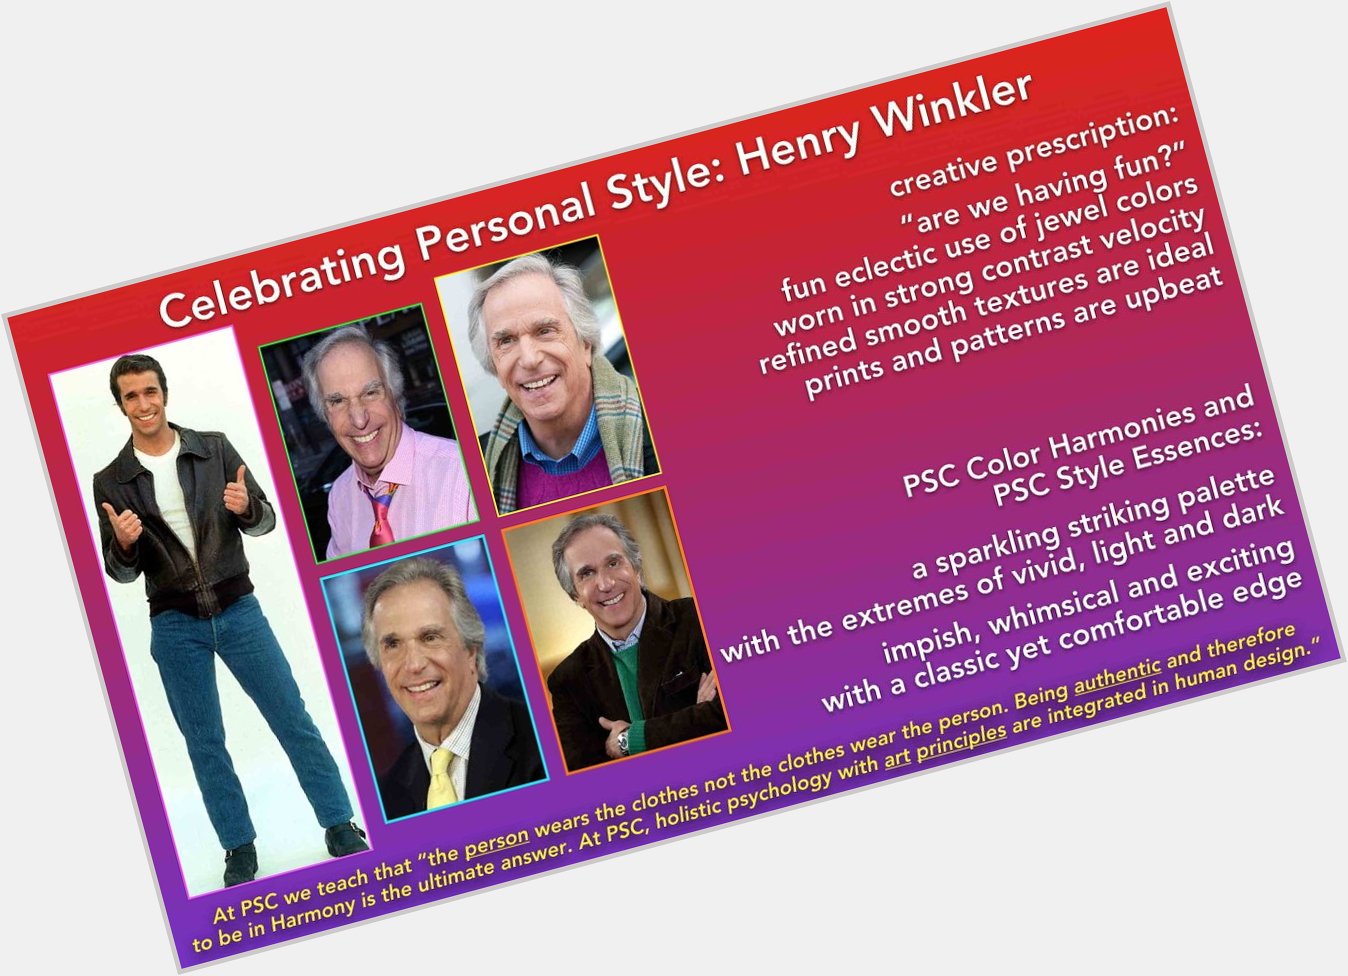 Happy birthday Henry Winkler. We celebrate your fun personal style today! 